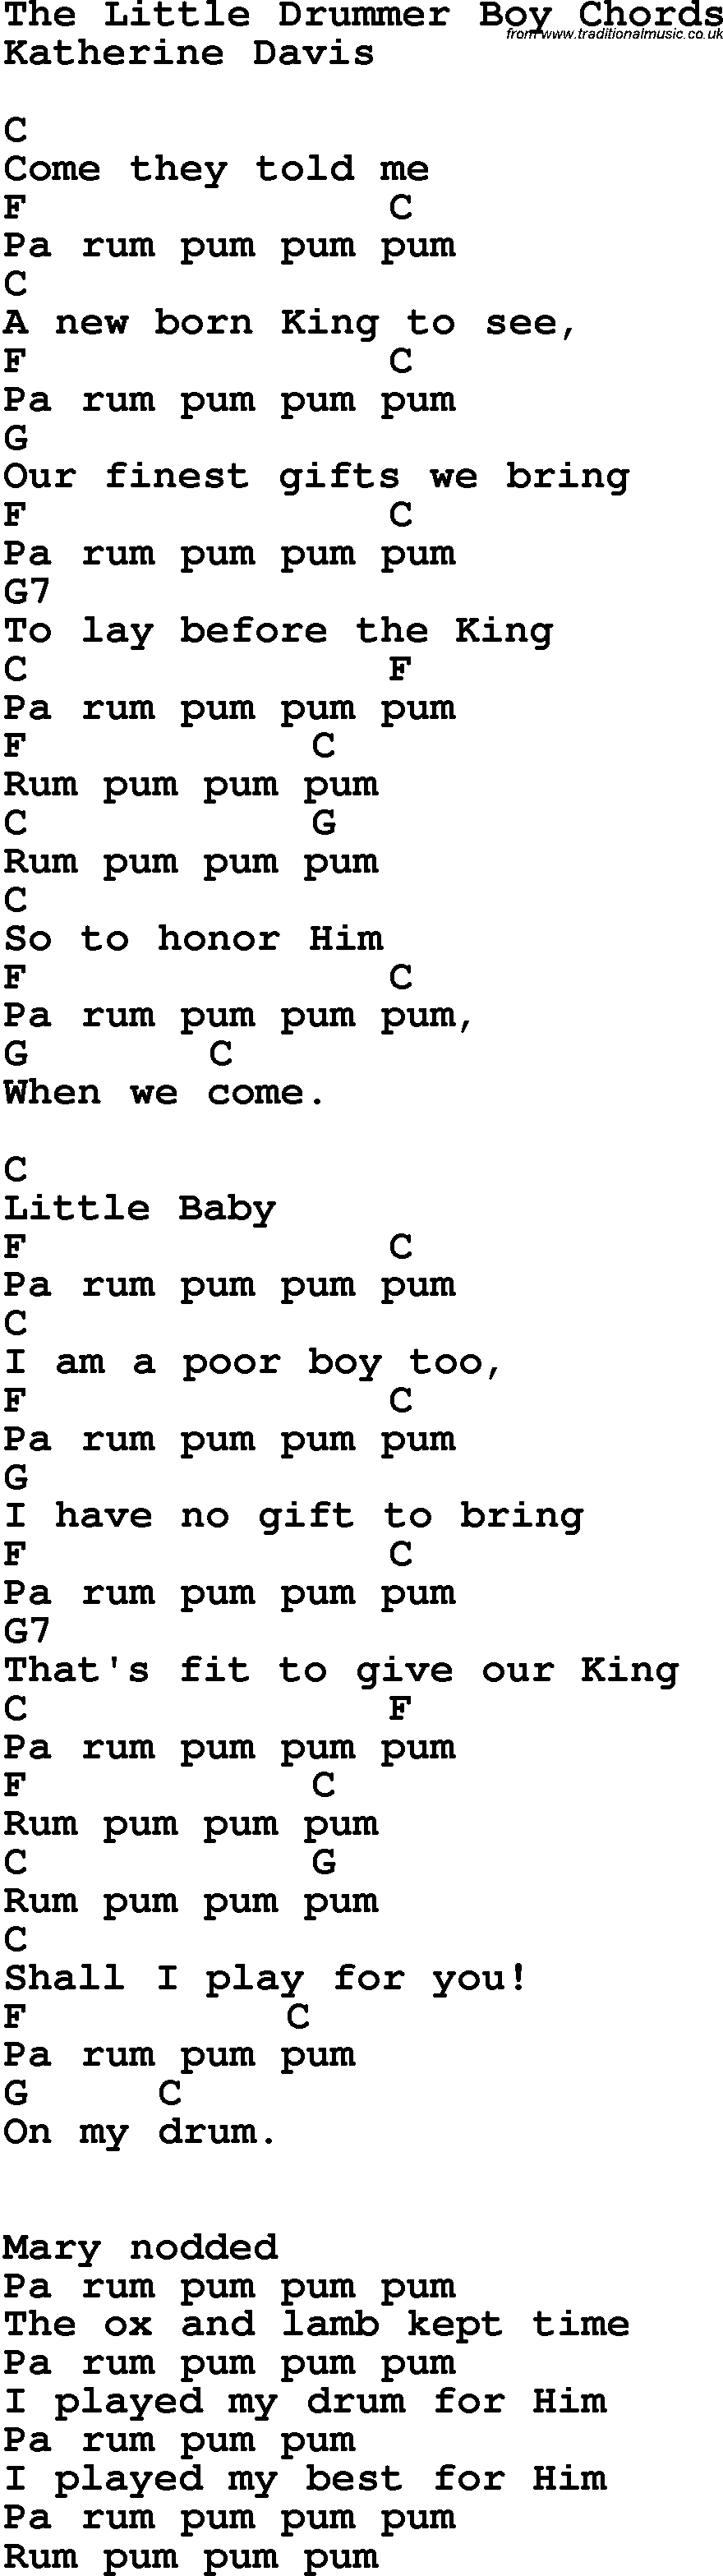 Song Lyrics with guitar chords for The Little Drummer Boy